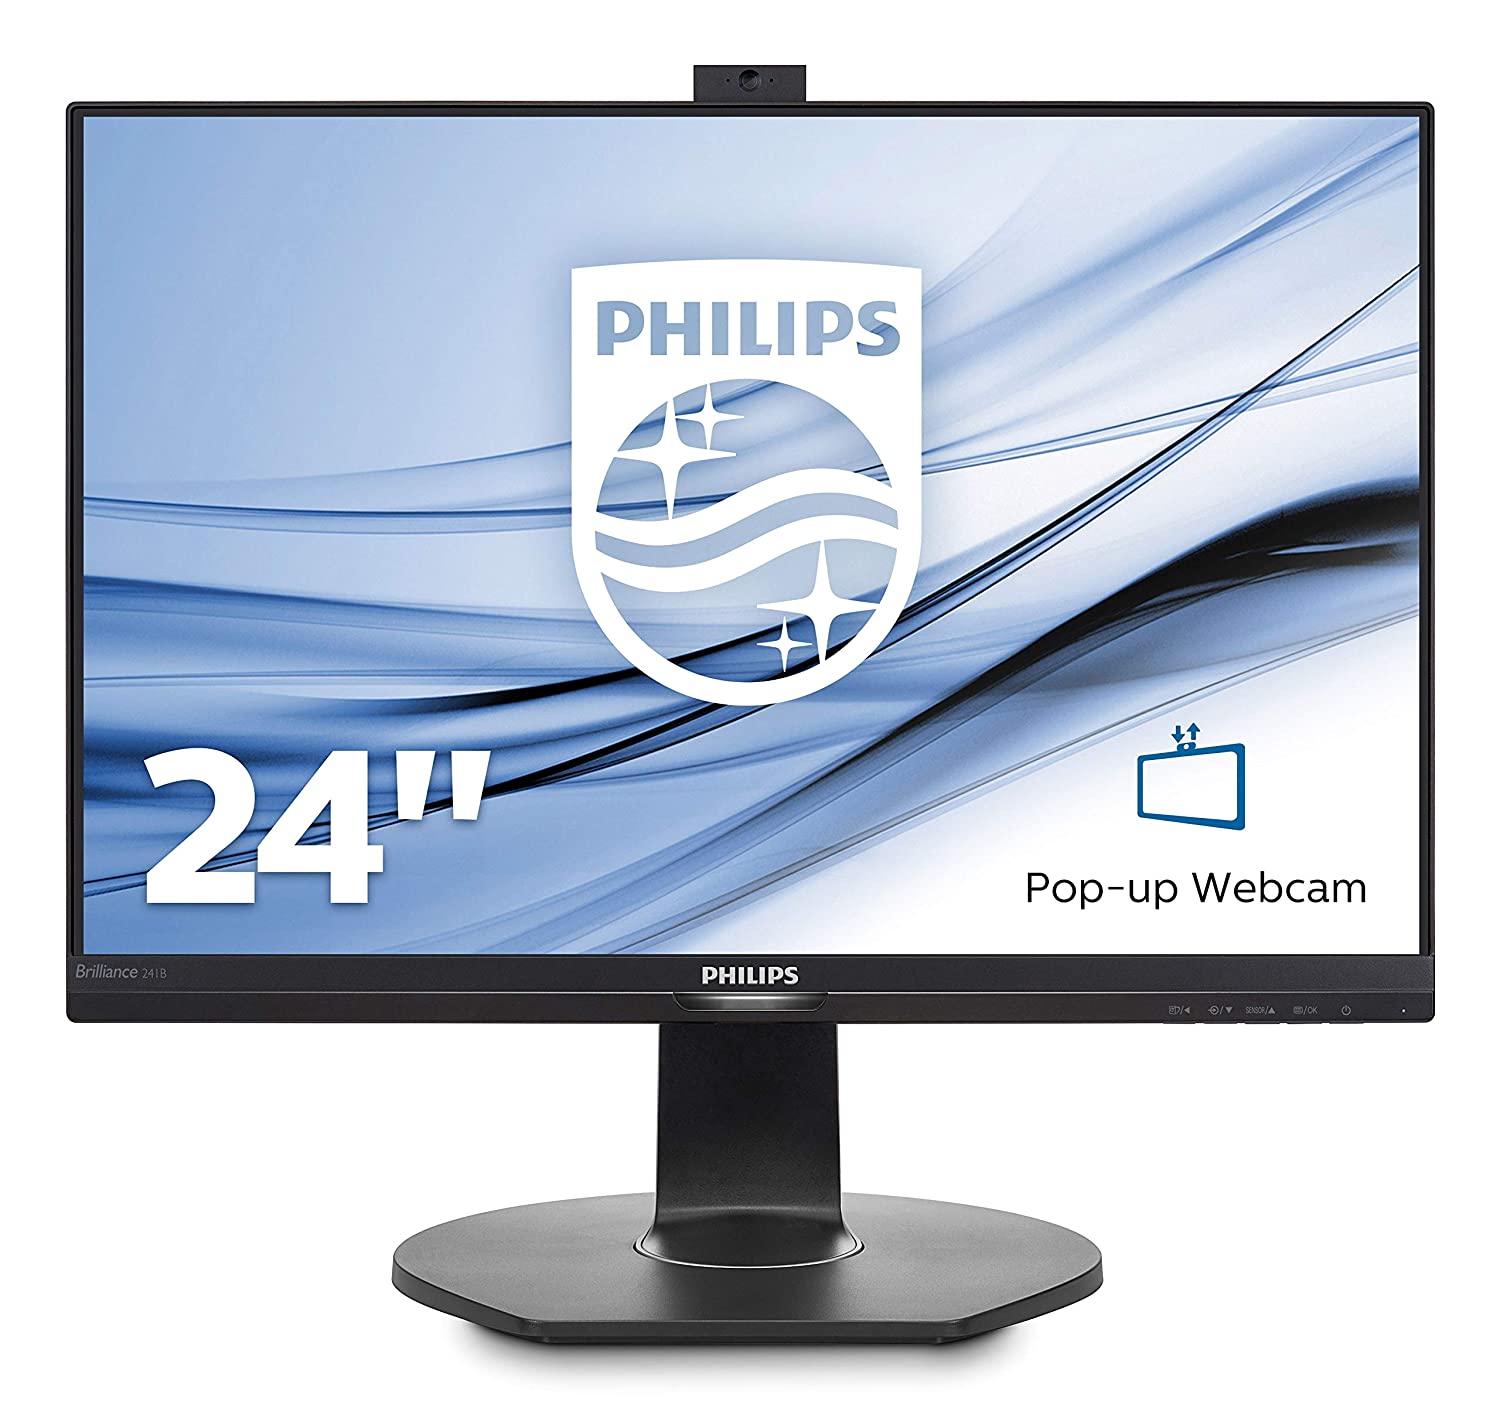 Philips 241B7QPJKEB/94 23.8 Inch Ips LED Monitor with Webcam